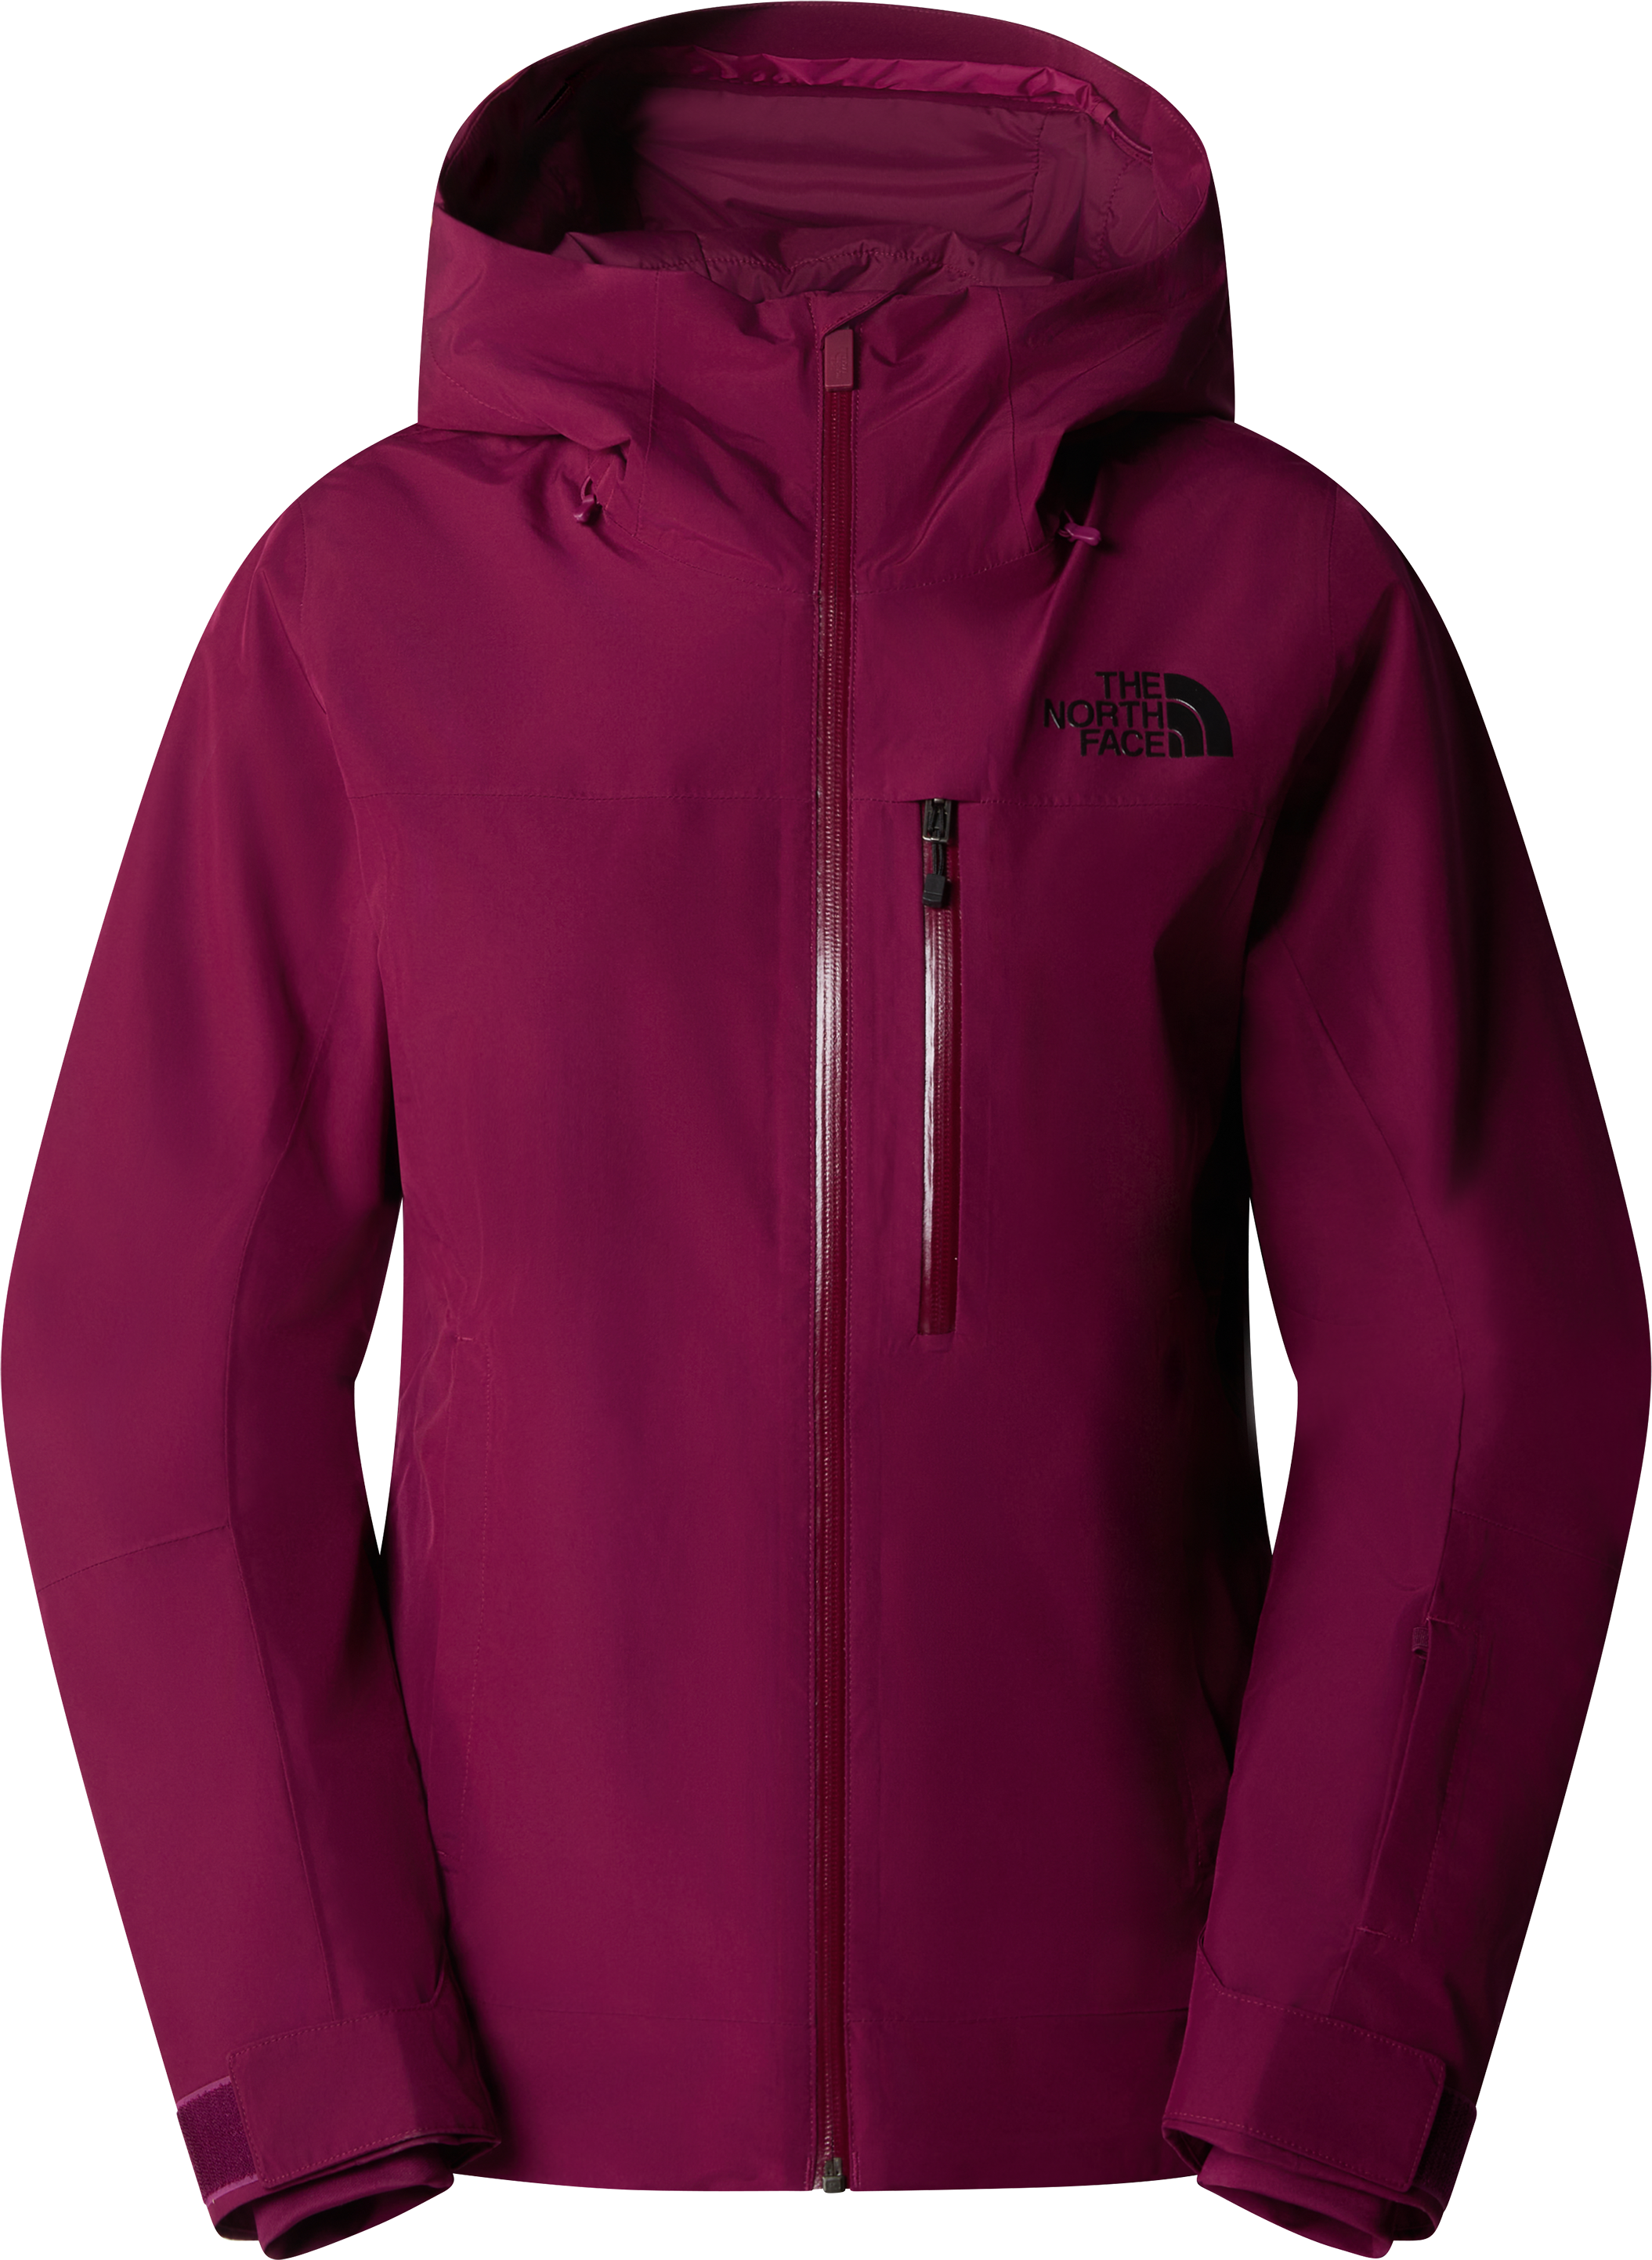 The North Face The North Face Women's Descendit Jacket Boysenberry XS, BOYSENBERRY